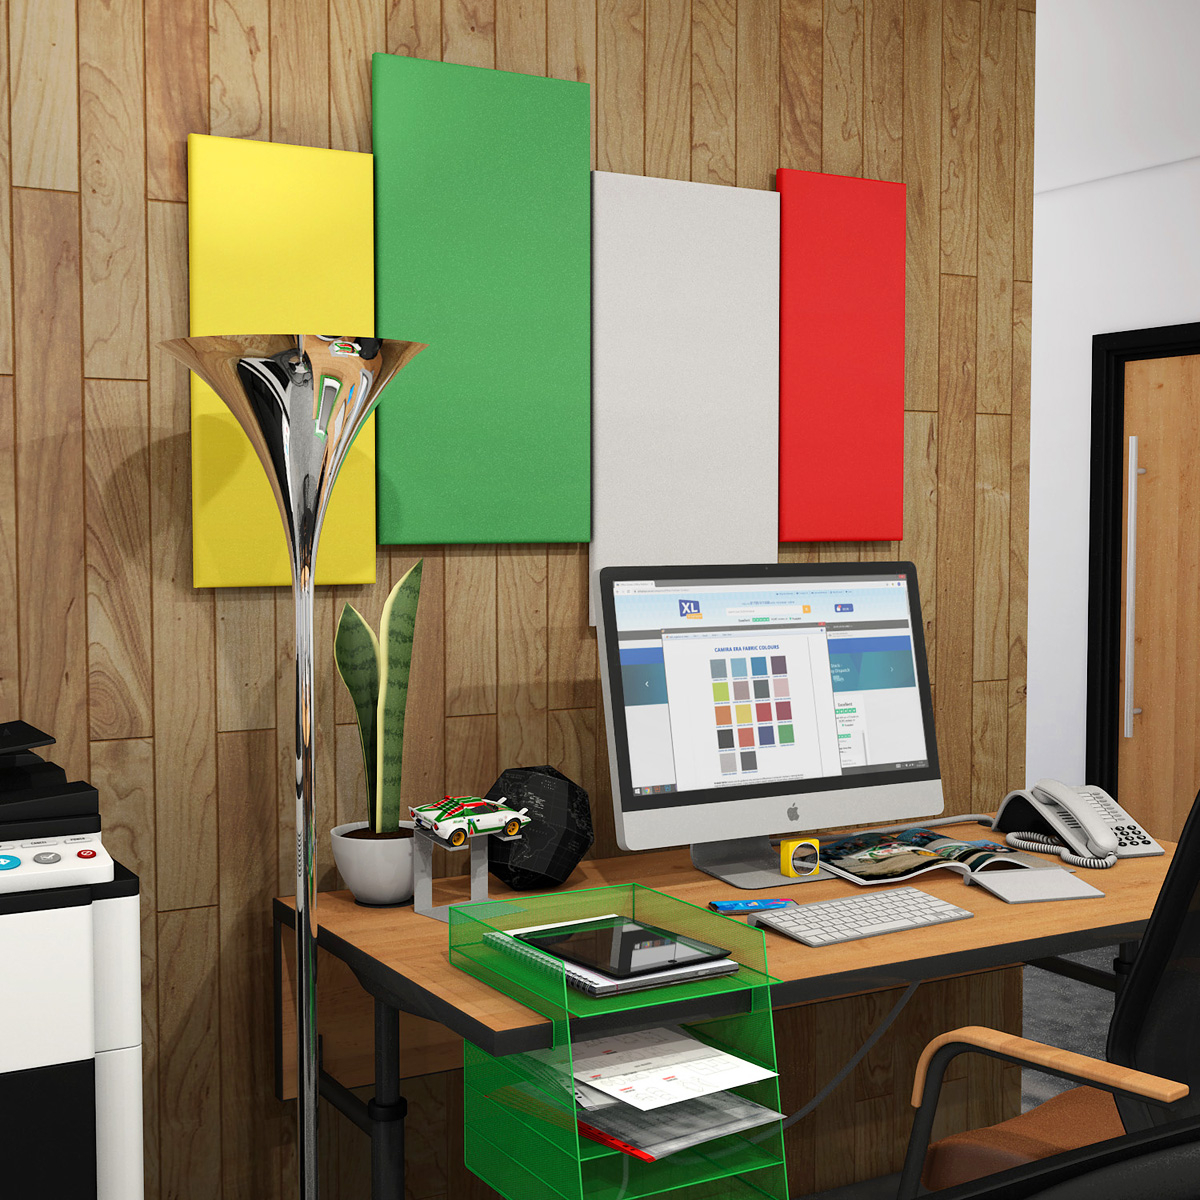 STRATOS™ Sound Absorbing Panels Can be Used to Decorate Feature Walls in Home Studies And Offices 